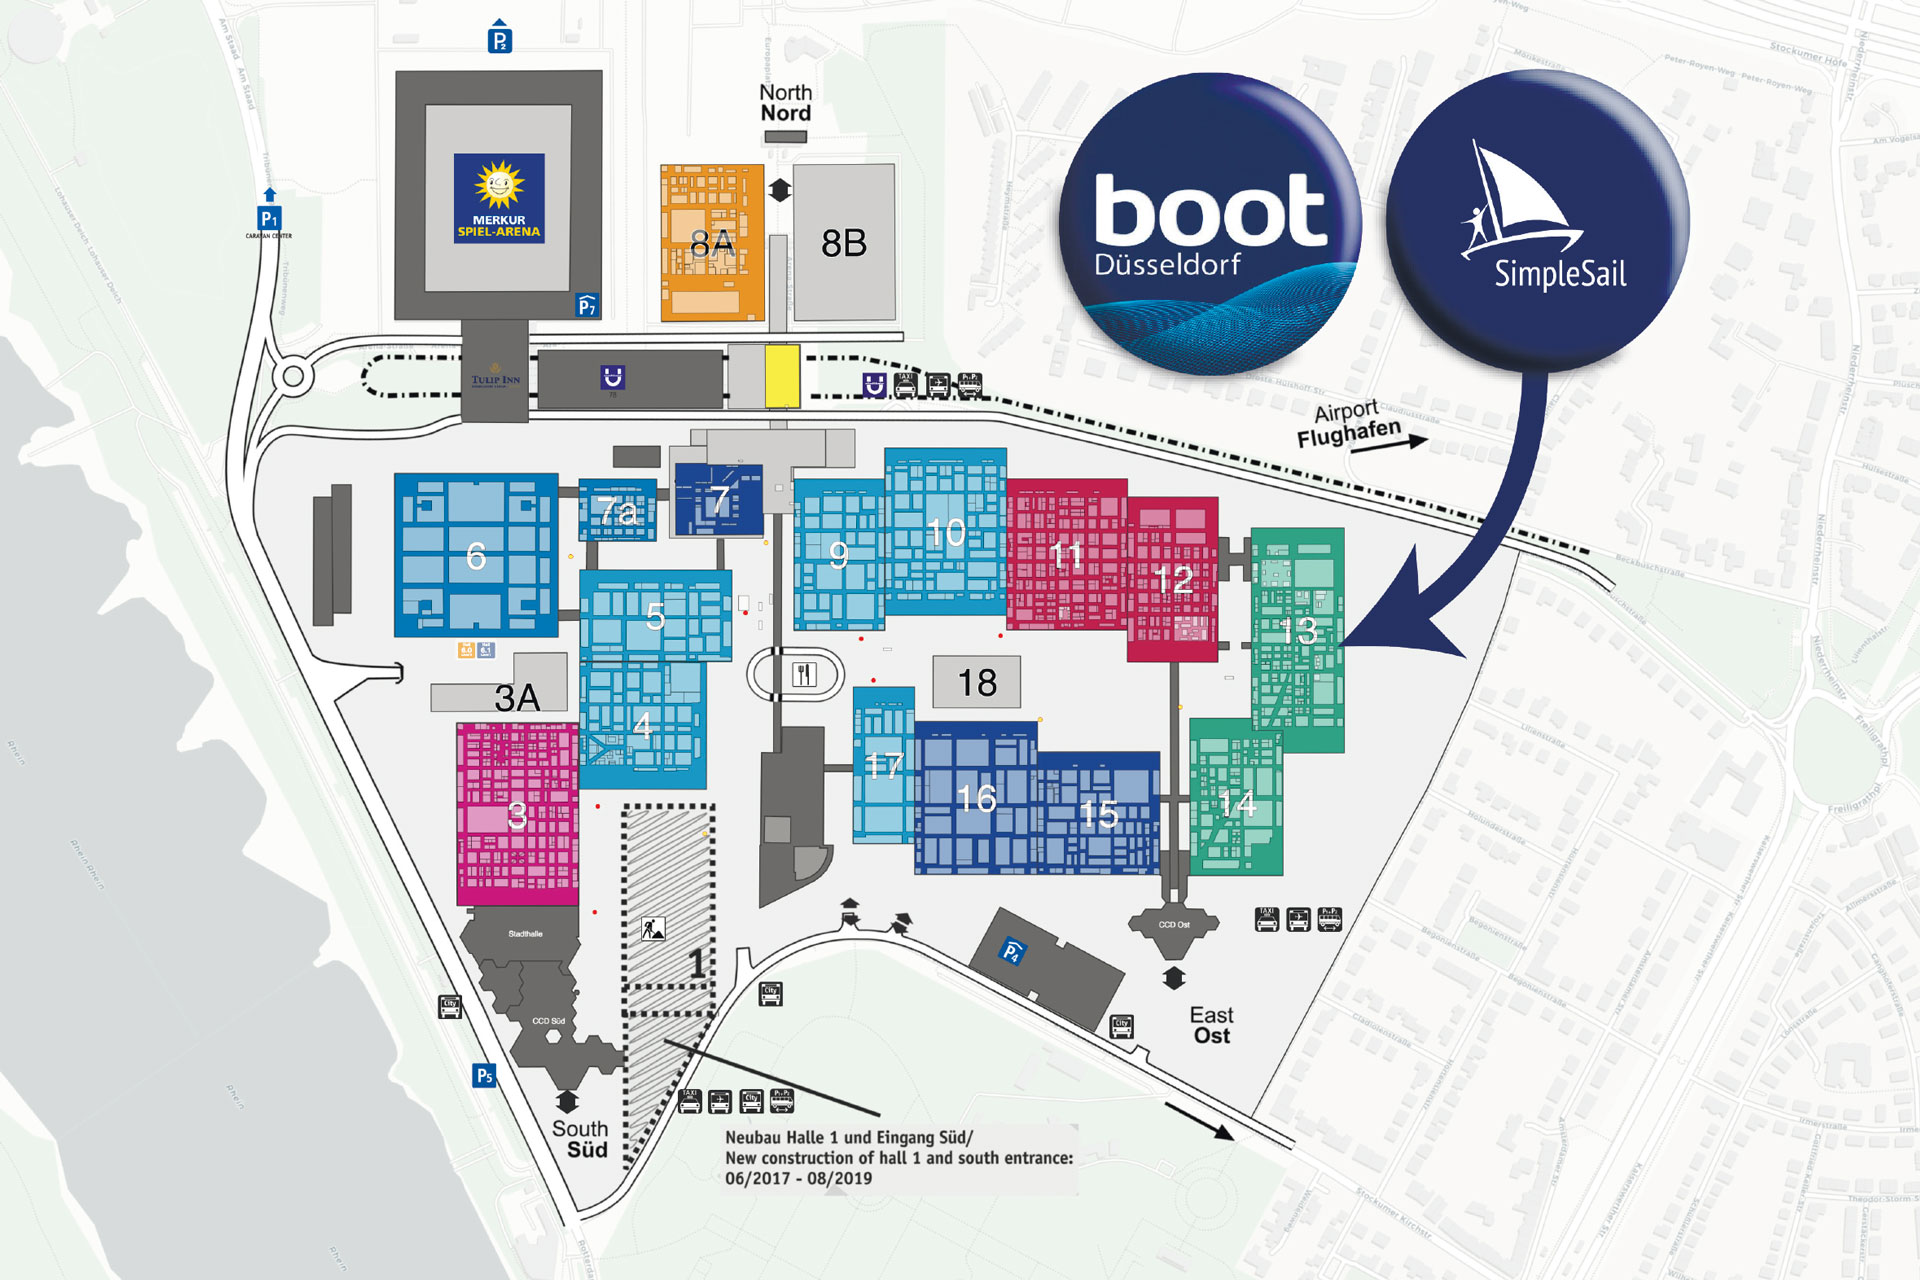 SimpleSail Stand on BOOT Dusseldorf 2019, exhibition plan